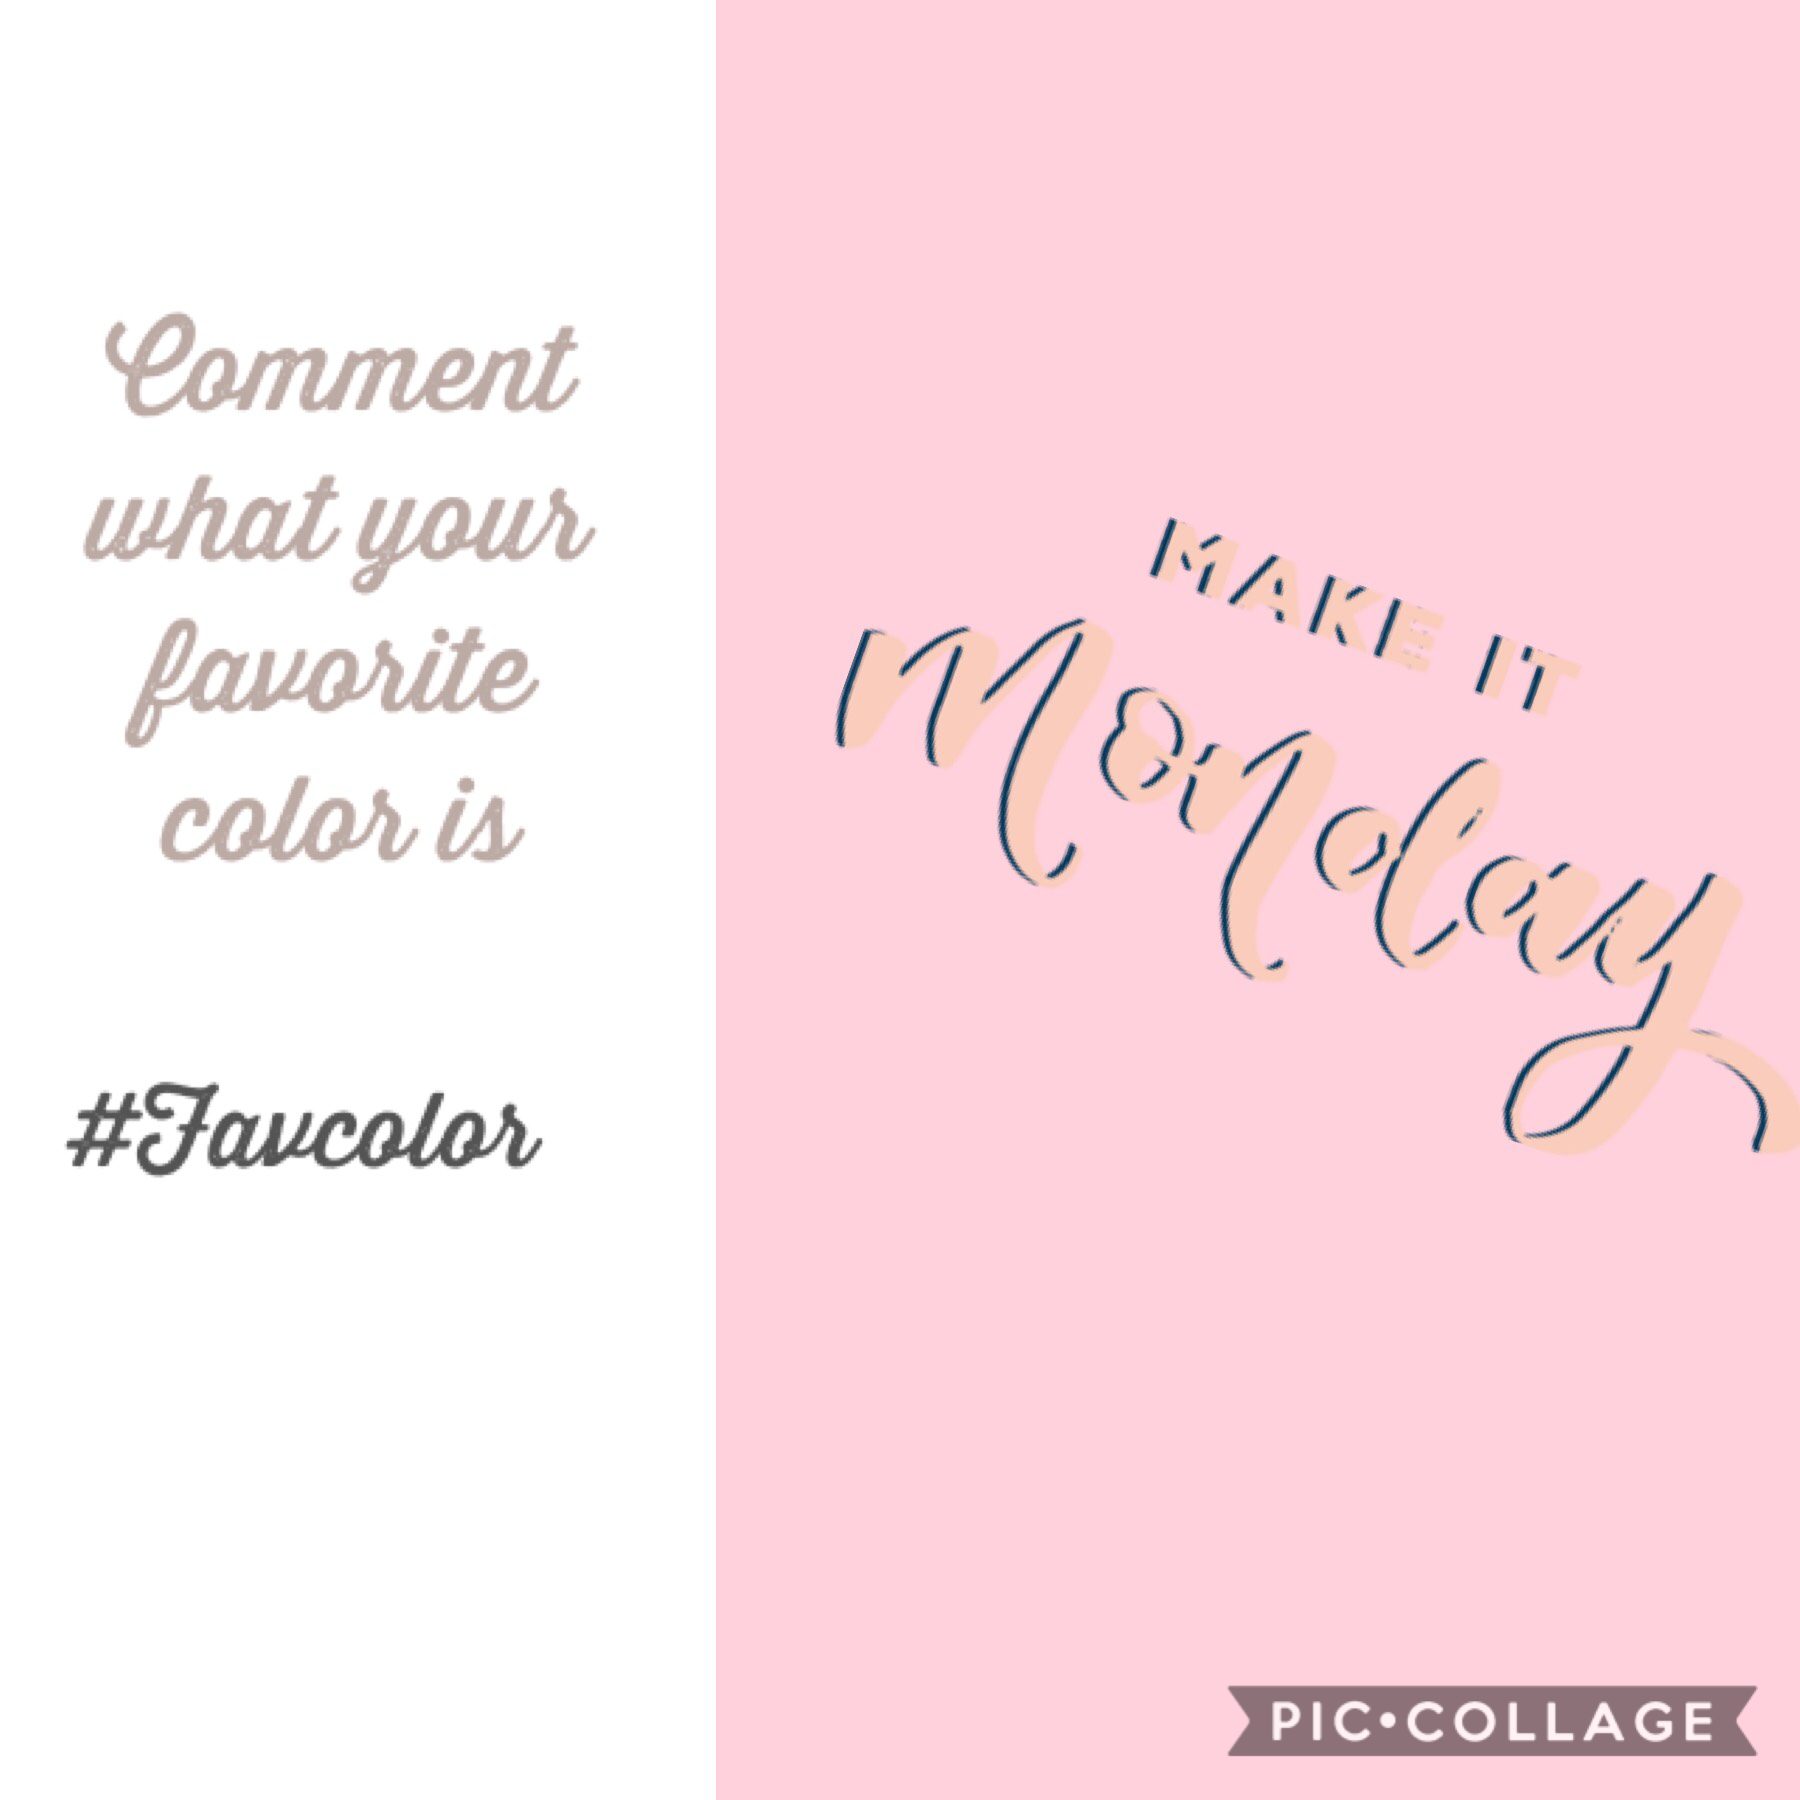 What is your favorite color